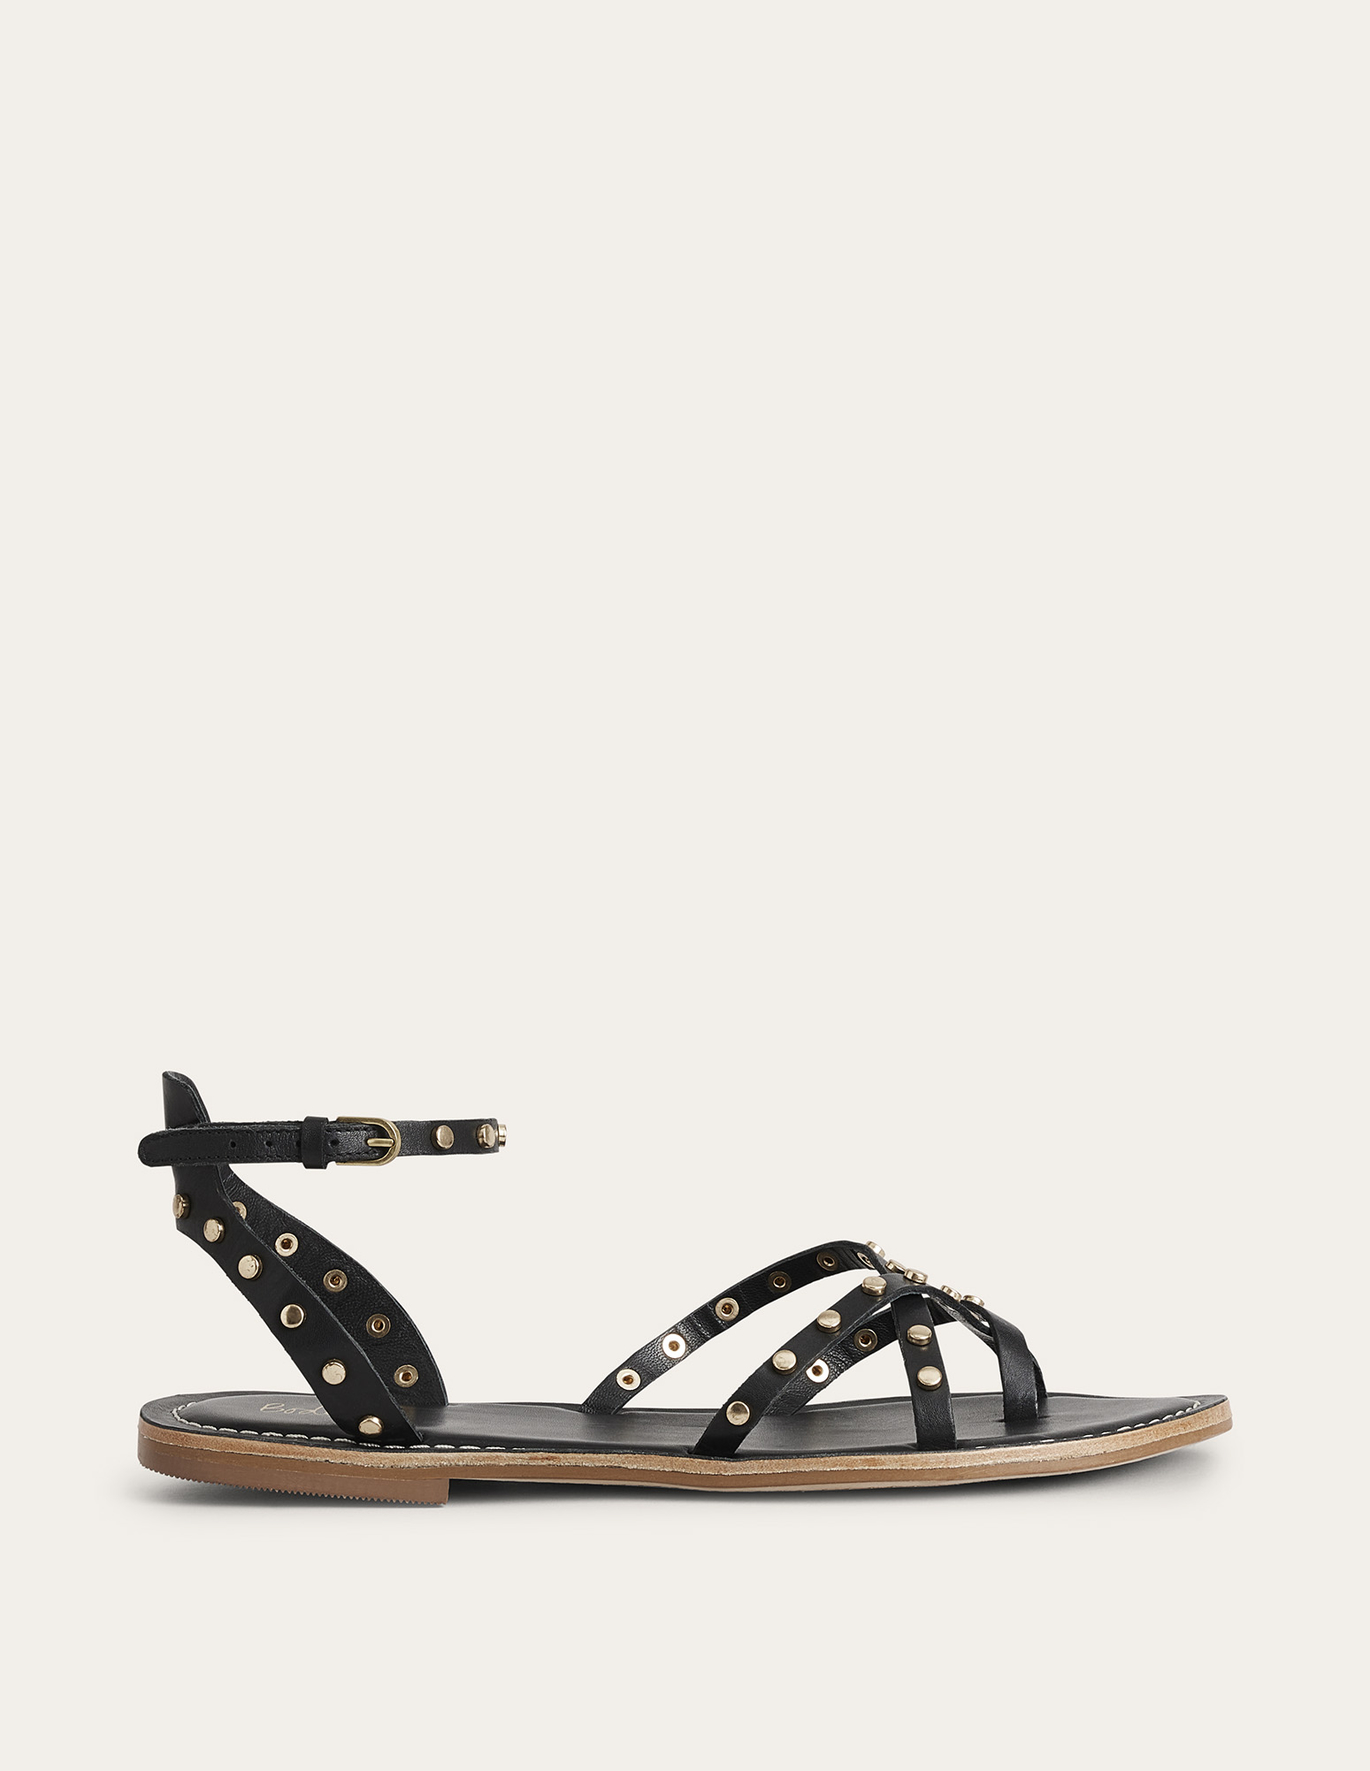 Boden Studded Classic Flat Sandals - Black Leather